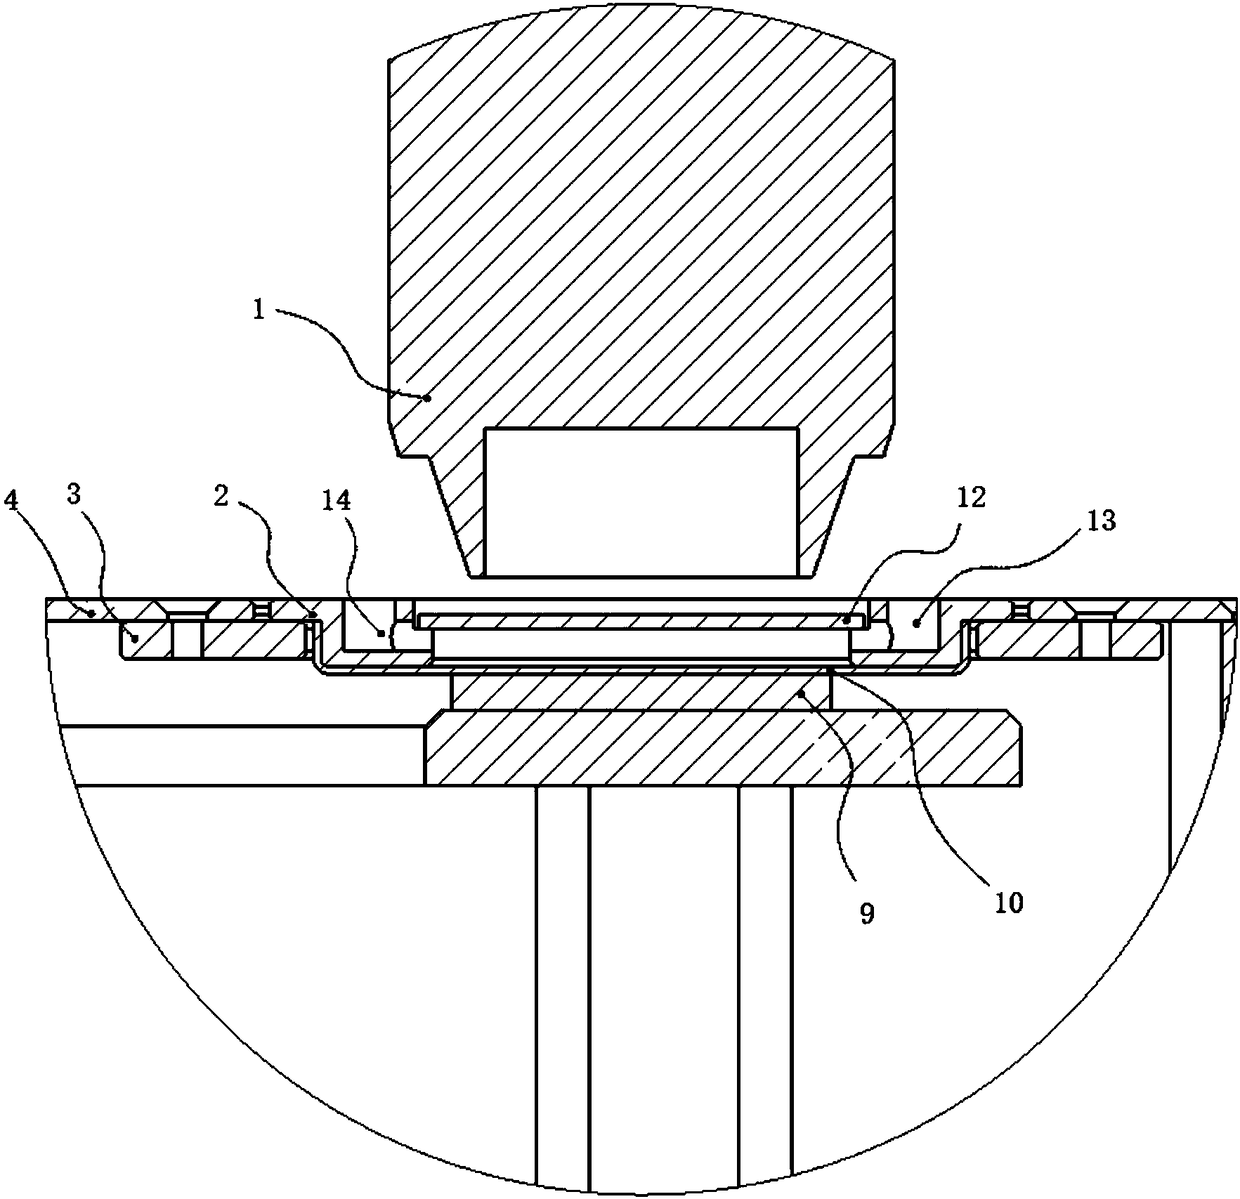 Photocuring 3D printing device and printing method